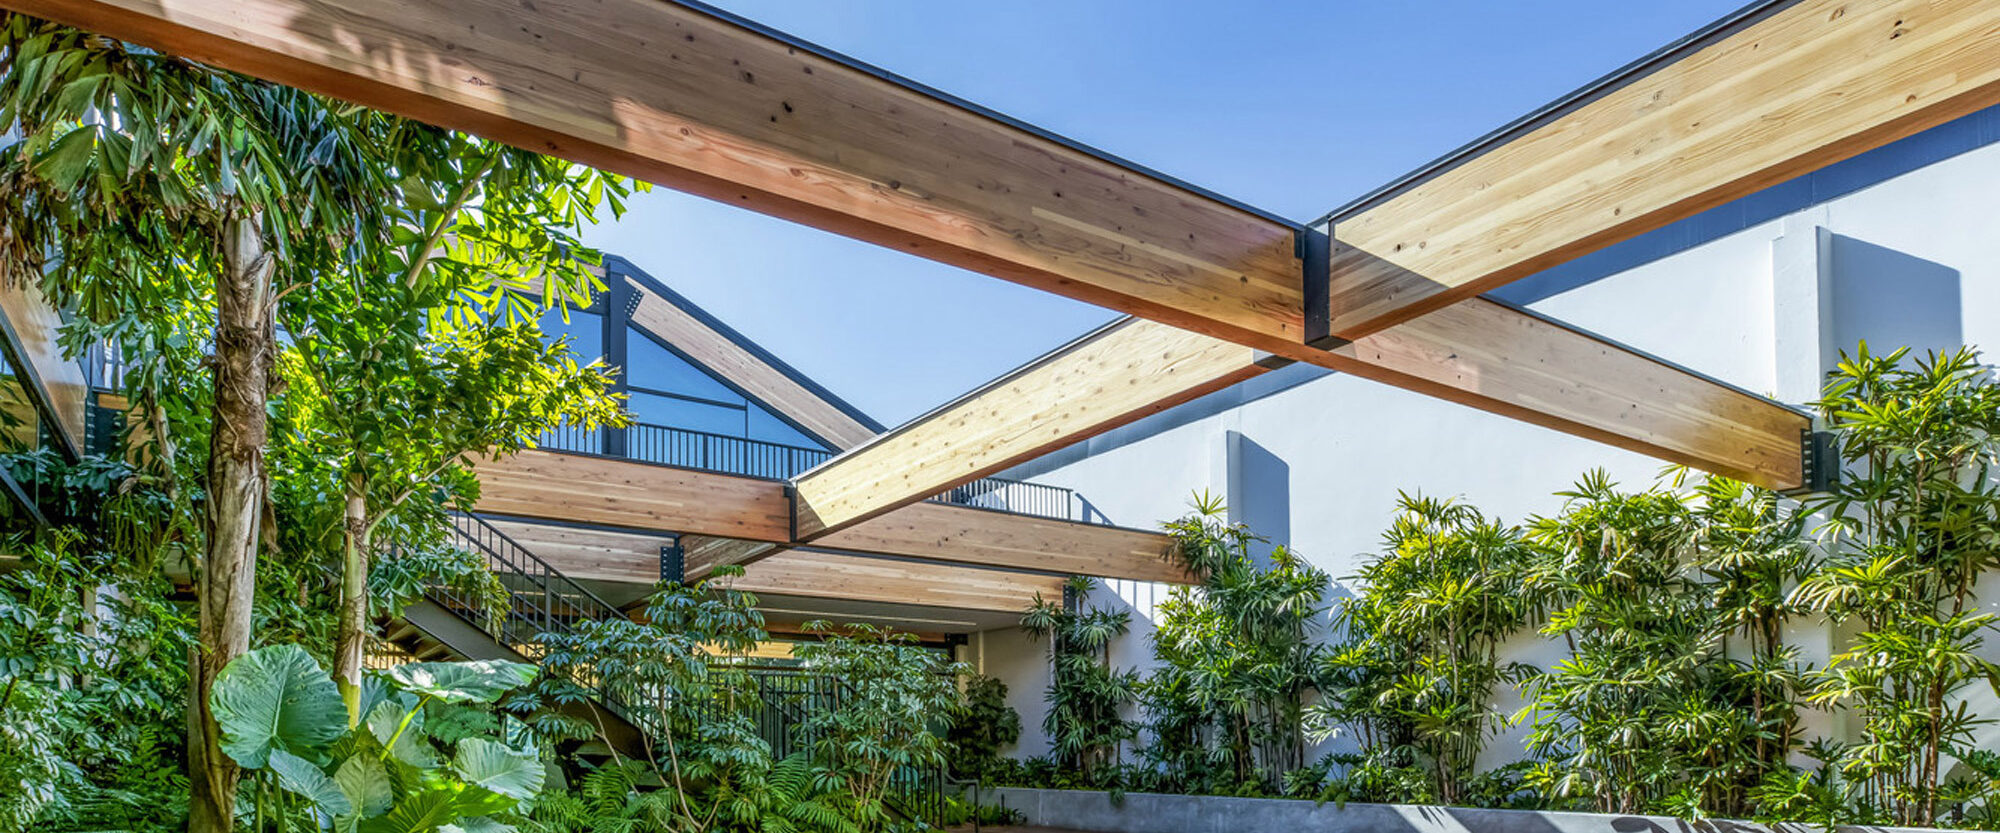 Lush greenery surrounds a modern outdoor atrium with wooden decking and beams. The architecture features clean lines, emphasizing natural light and indoor-outdoor fluidity.